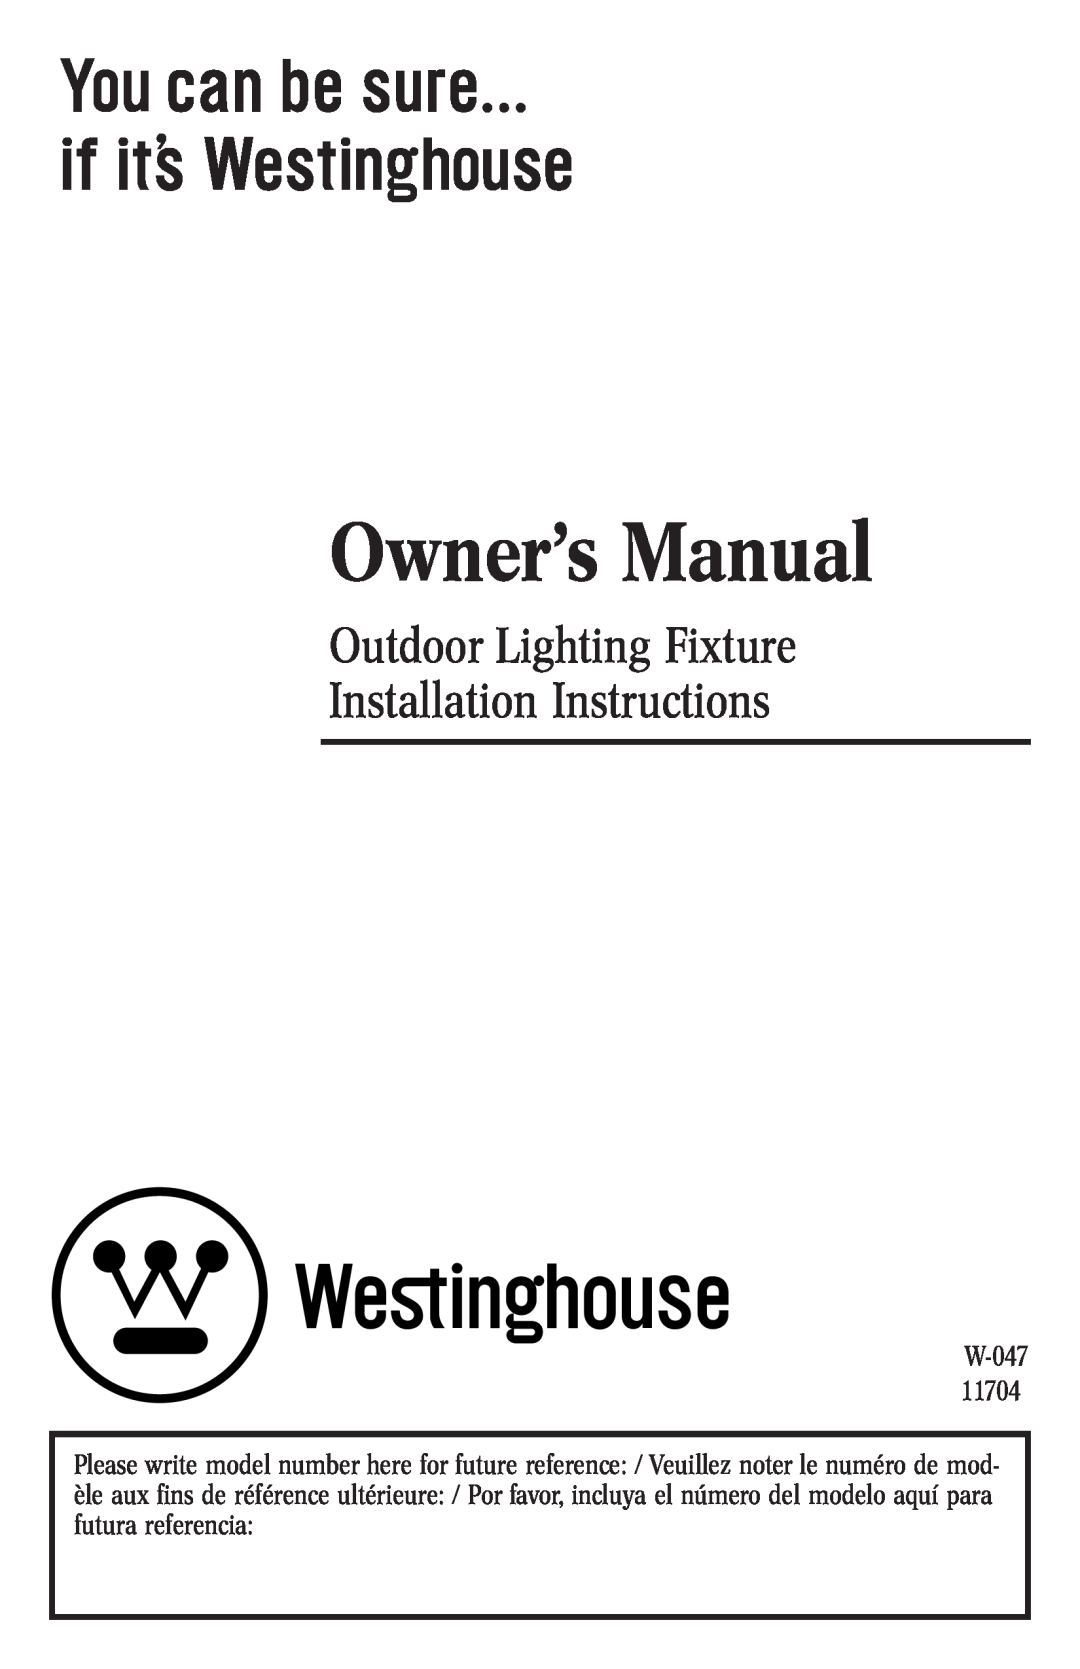 Westinghouse 11704 owner manual Outdoor Lighting Fixture Installation Instructions 